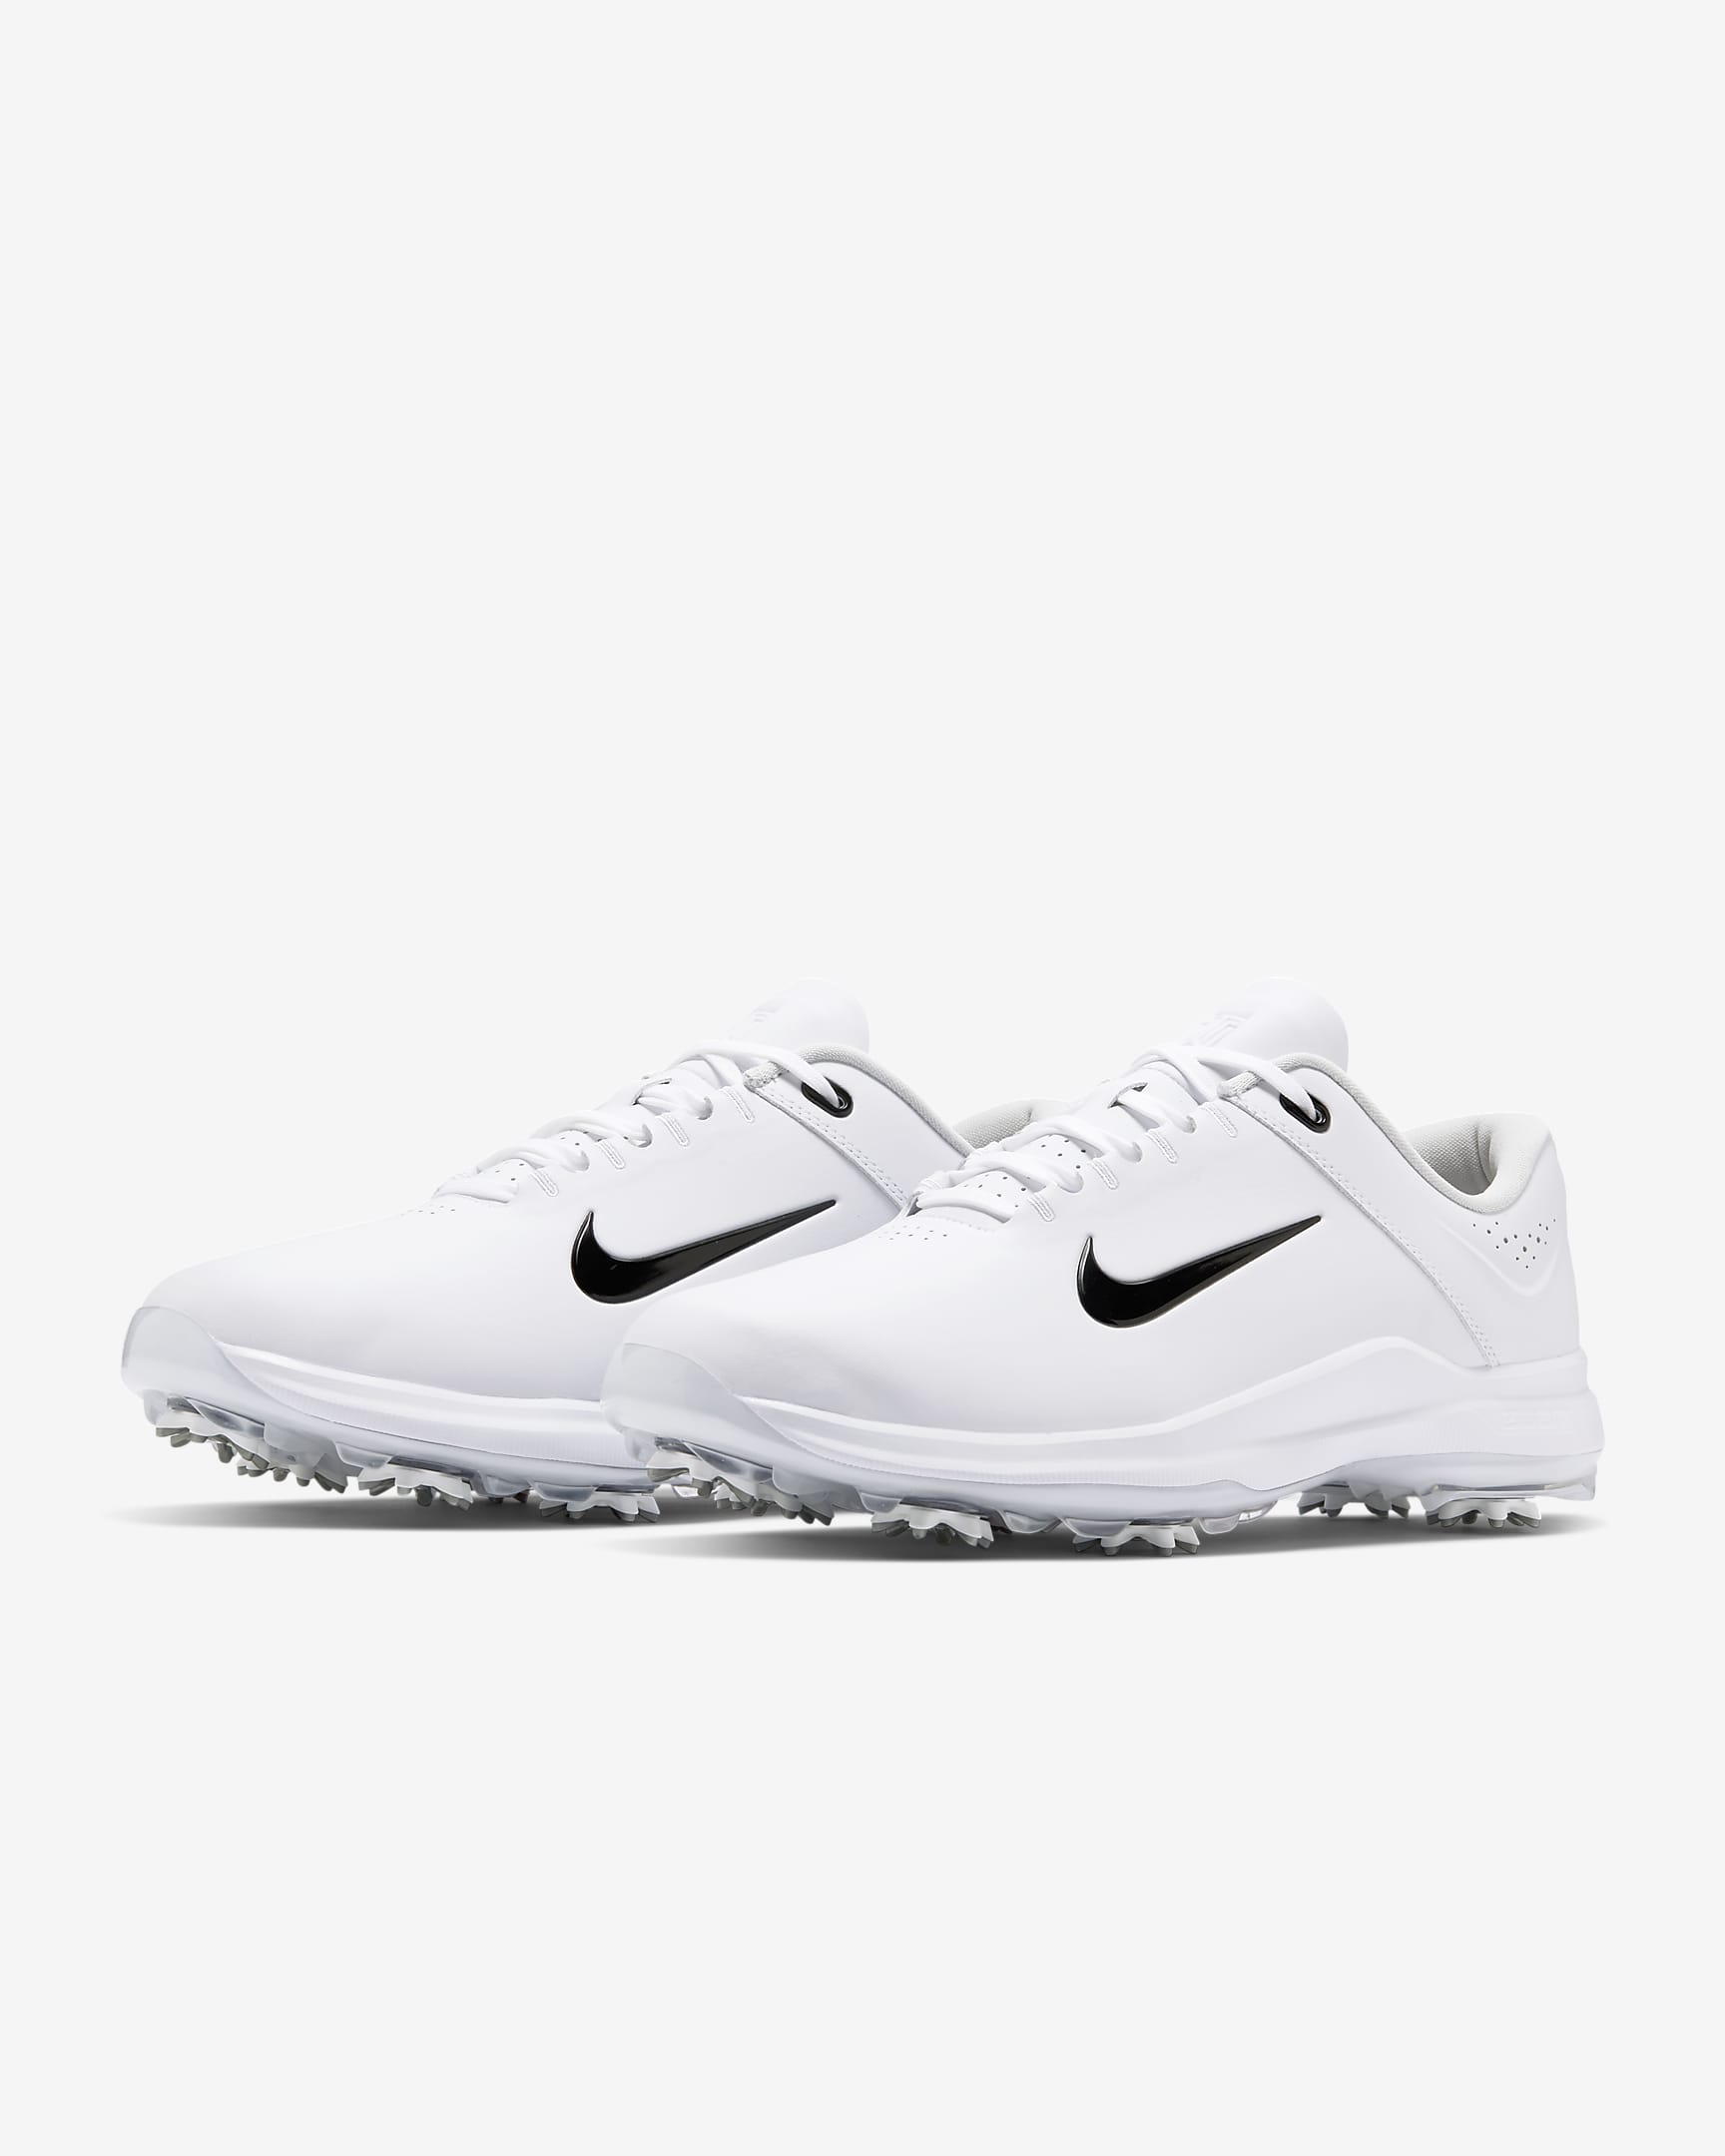 Tiger Woods '20 Men's Golf Shoes (Wide). Nike ID